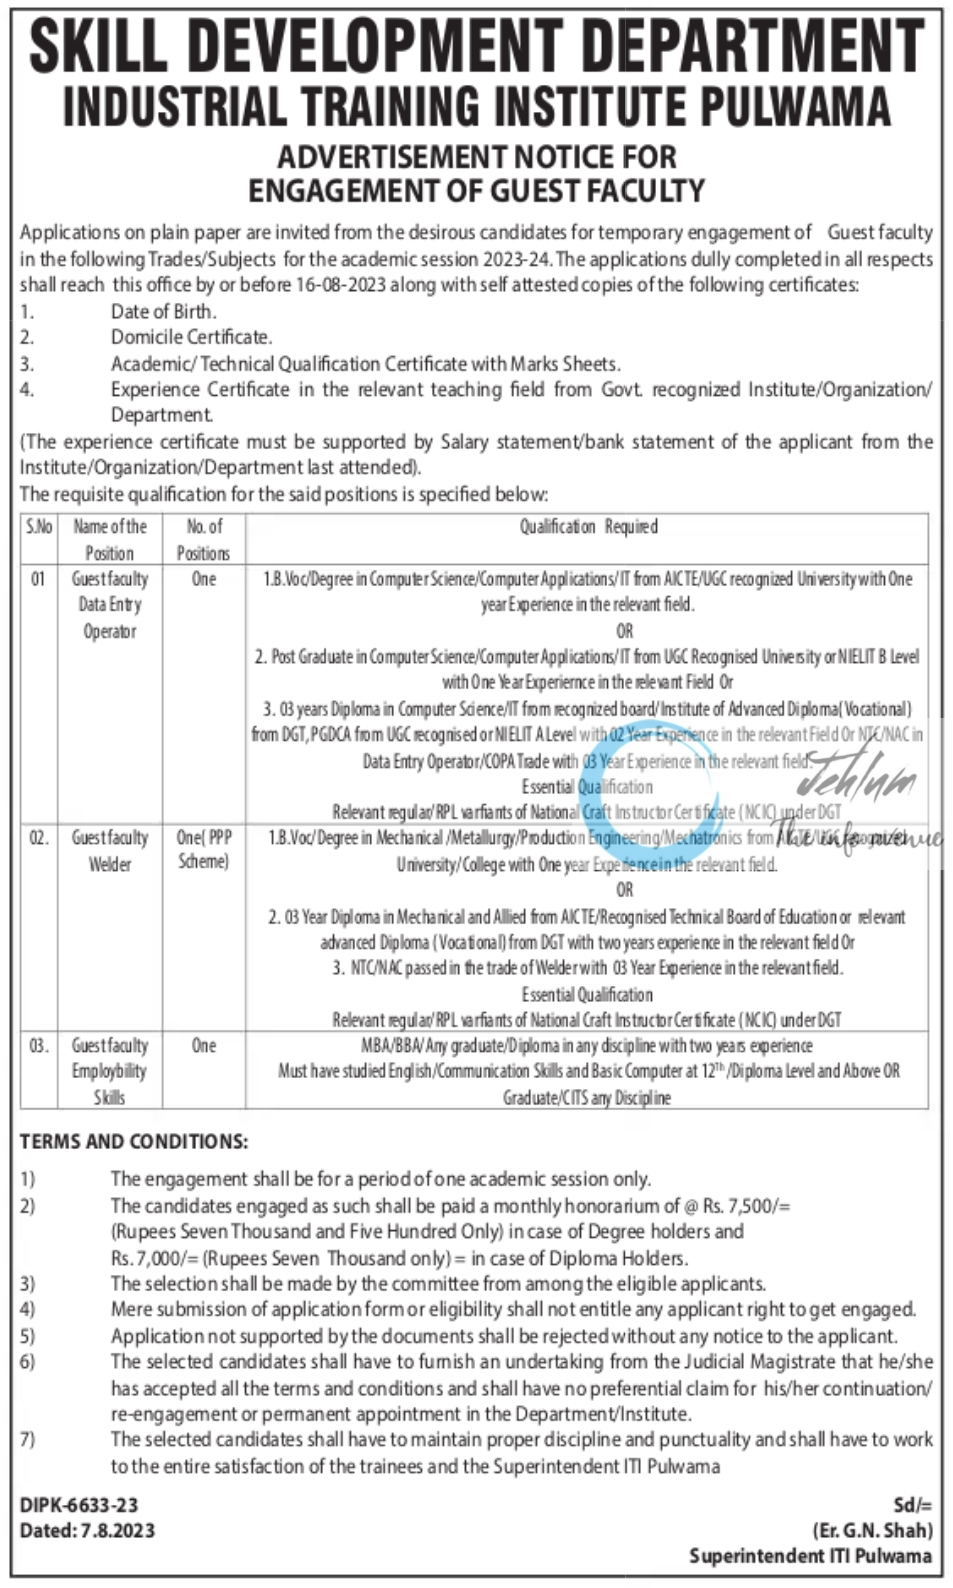 ITI PULWAMA GUEST FACULTY ADVERTISEMENT NOTICE 2023